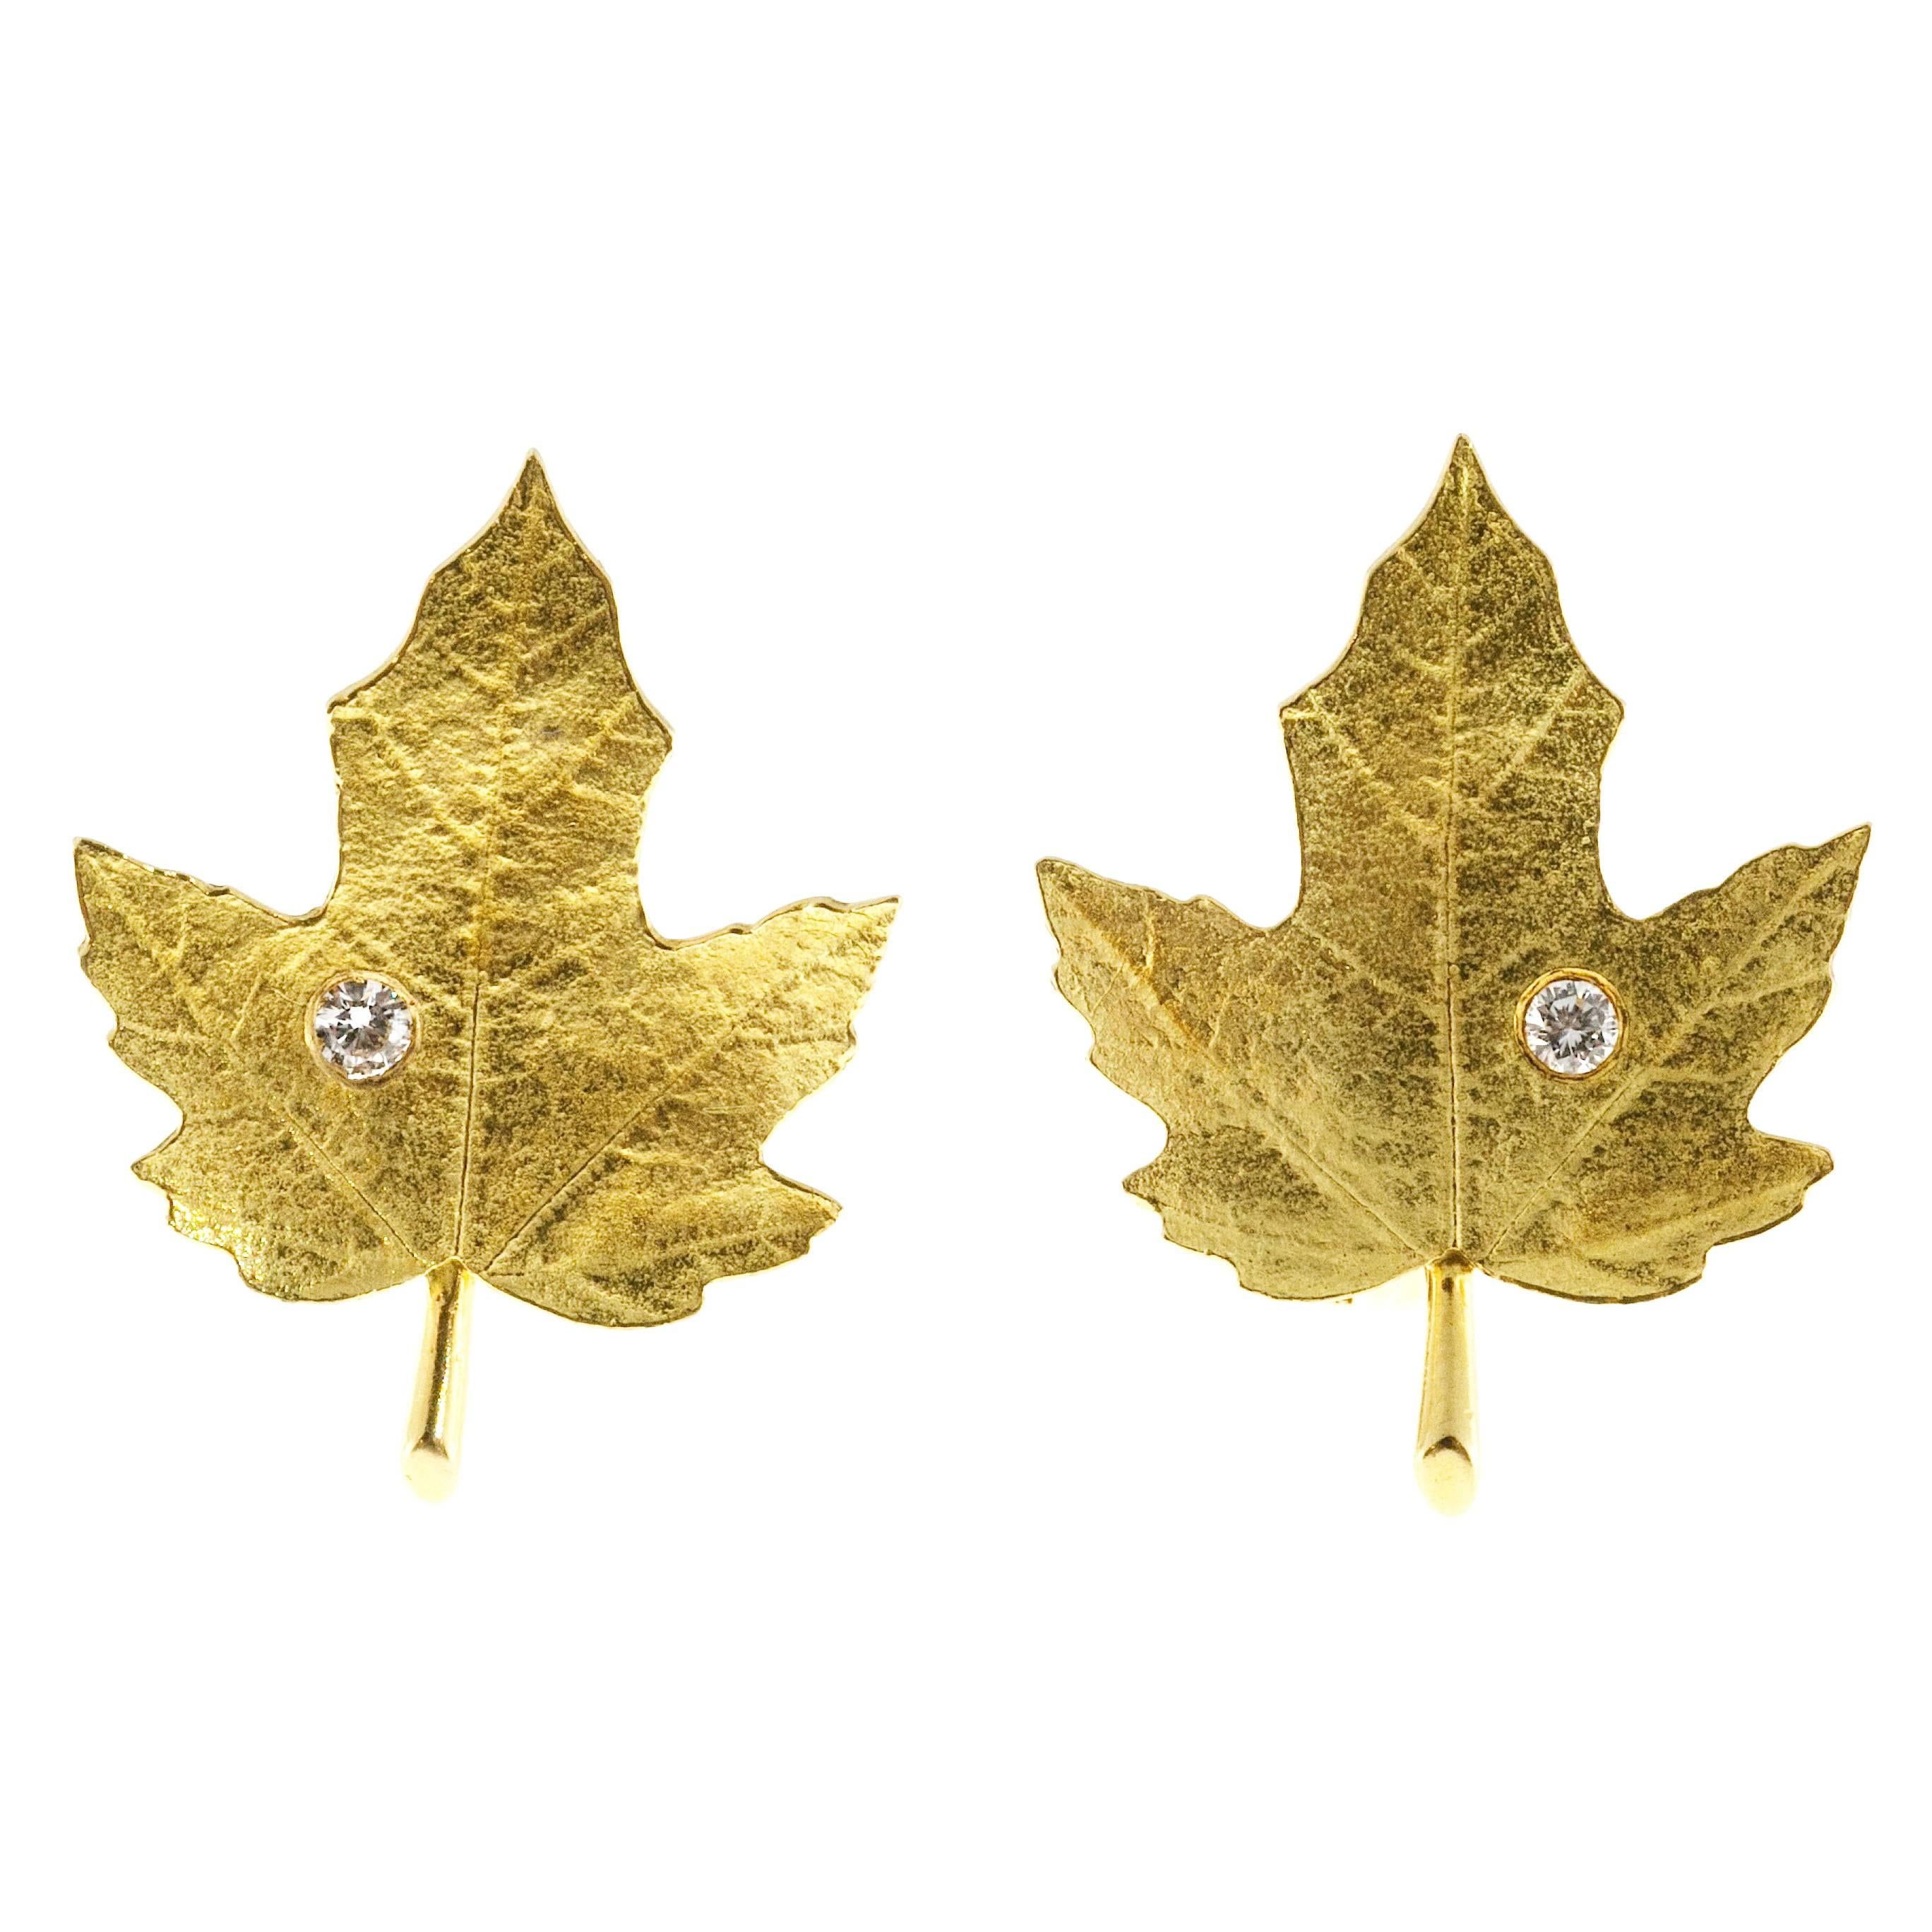 Tiffany & Co 18k textured maple leaf design non pierced adjustable clip earrings. Each leaf with one full cut diamond. Circa 1950 to 1959.

2 round diamonds .10cts each, F, VS
18k Yellow Gold
Stamped: Tiffany + Co 18k PAt2423905 JP
8.5